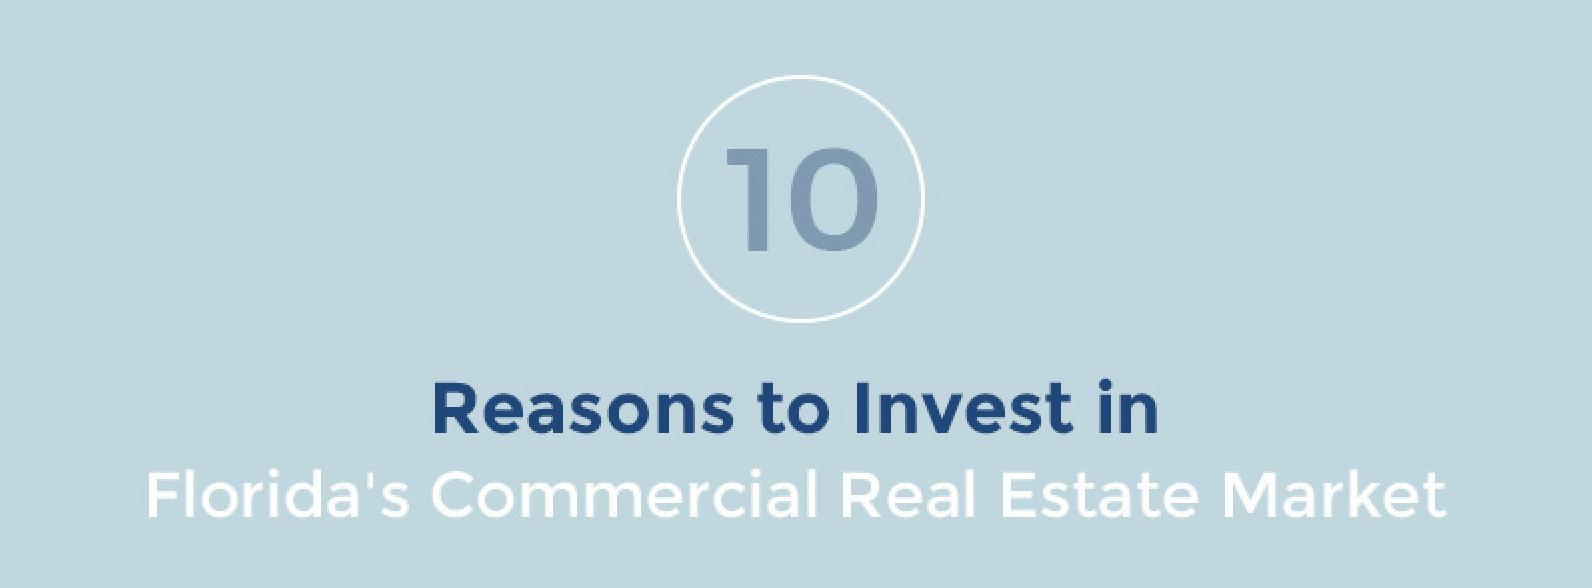 Reasons to Invest in Florida Commercial Real Estate